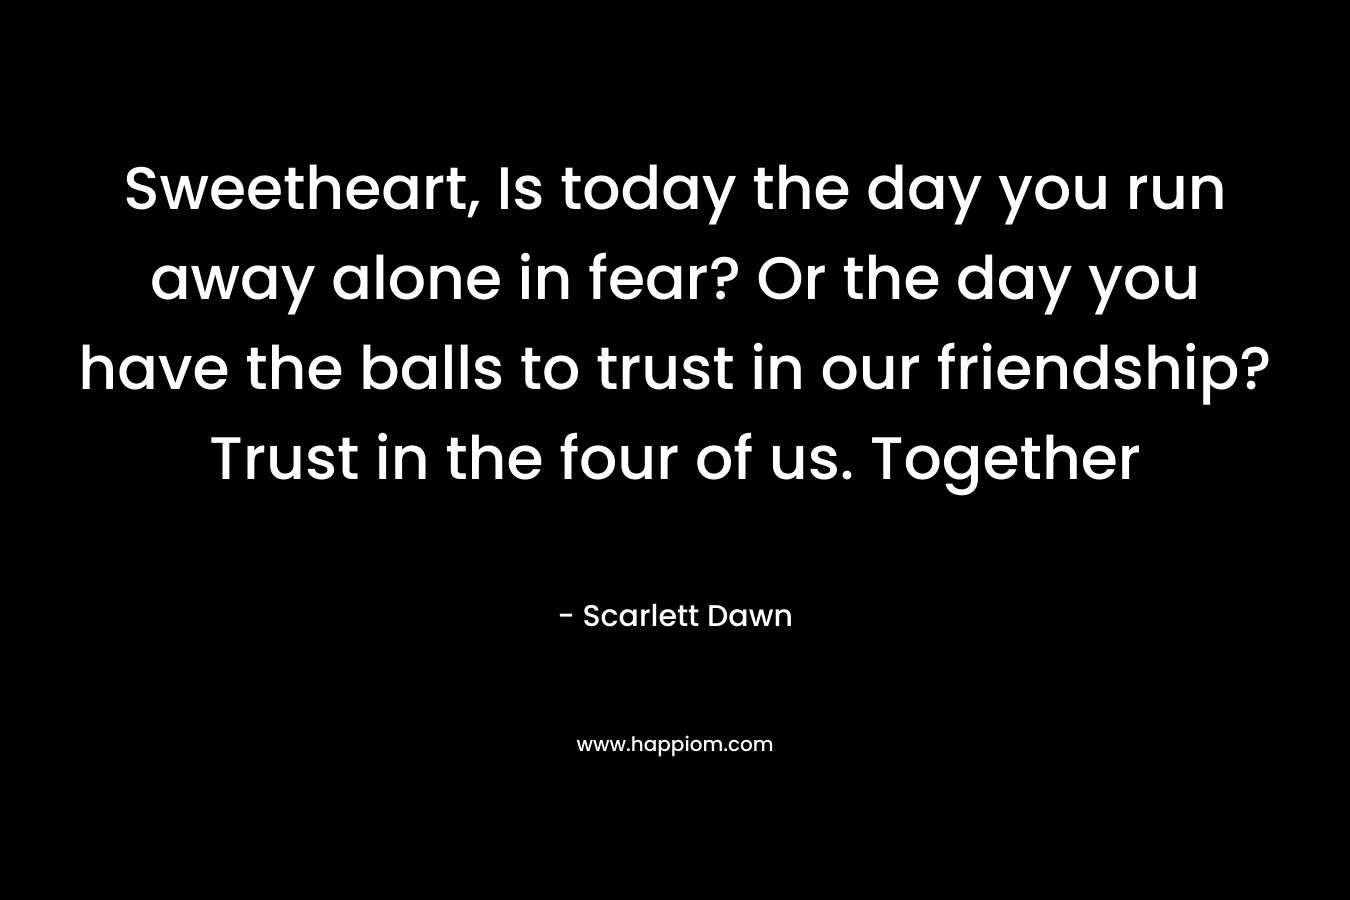 Sweetheart, Is today the day you run away alone in fear? Or the day you have the balls to trust in our friendship? Trust in the four of us. Together